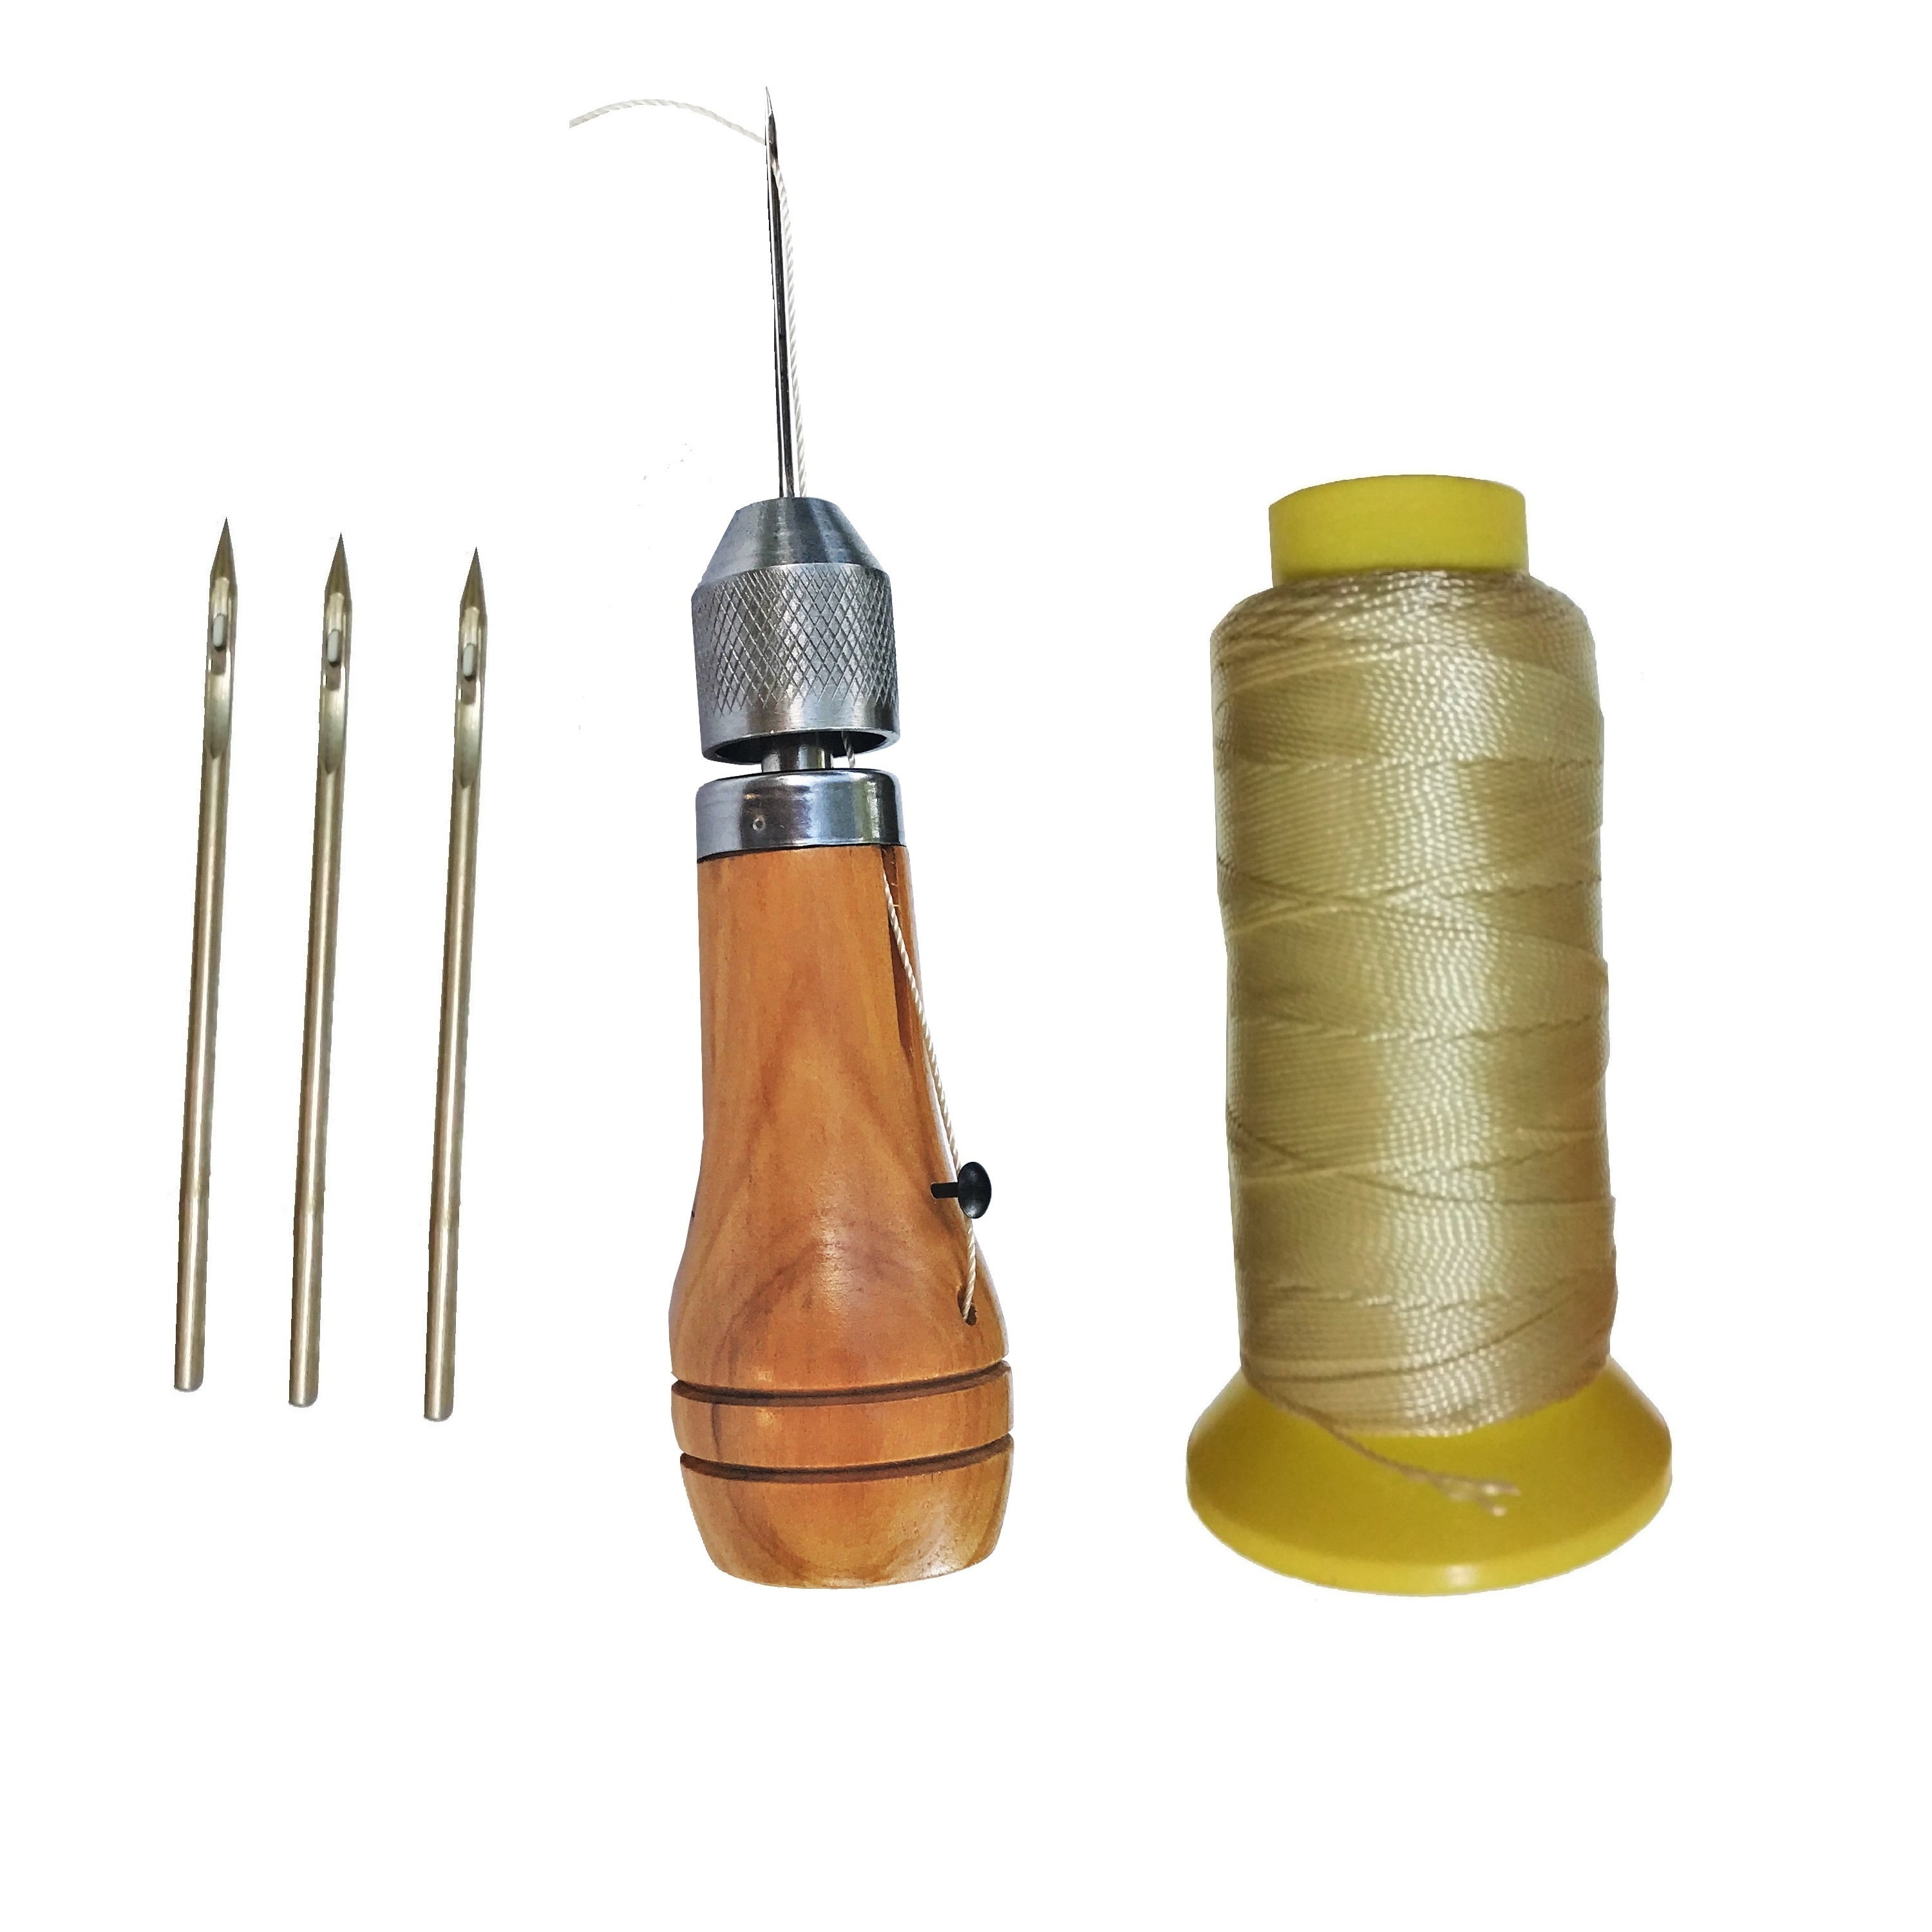 Leather Replacement Threads Genuine Awl for All Canvas Sewing Needle Refills